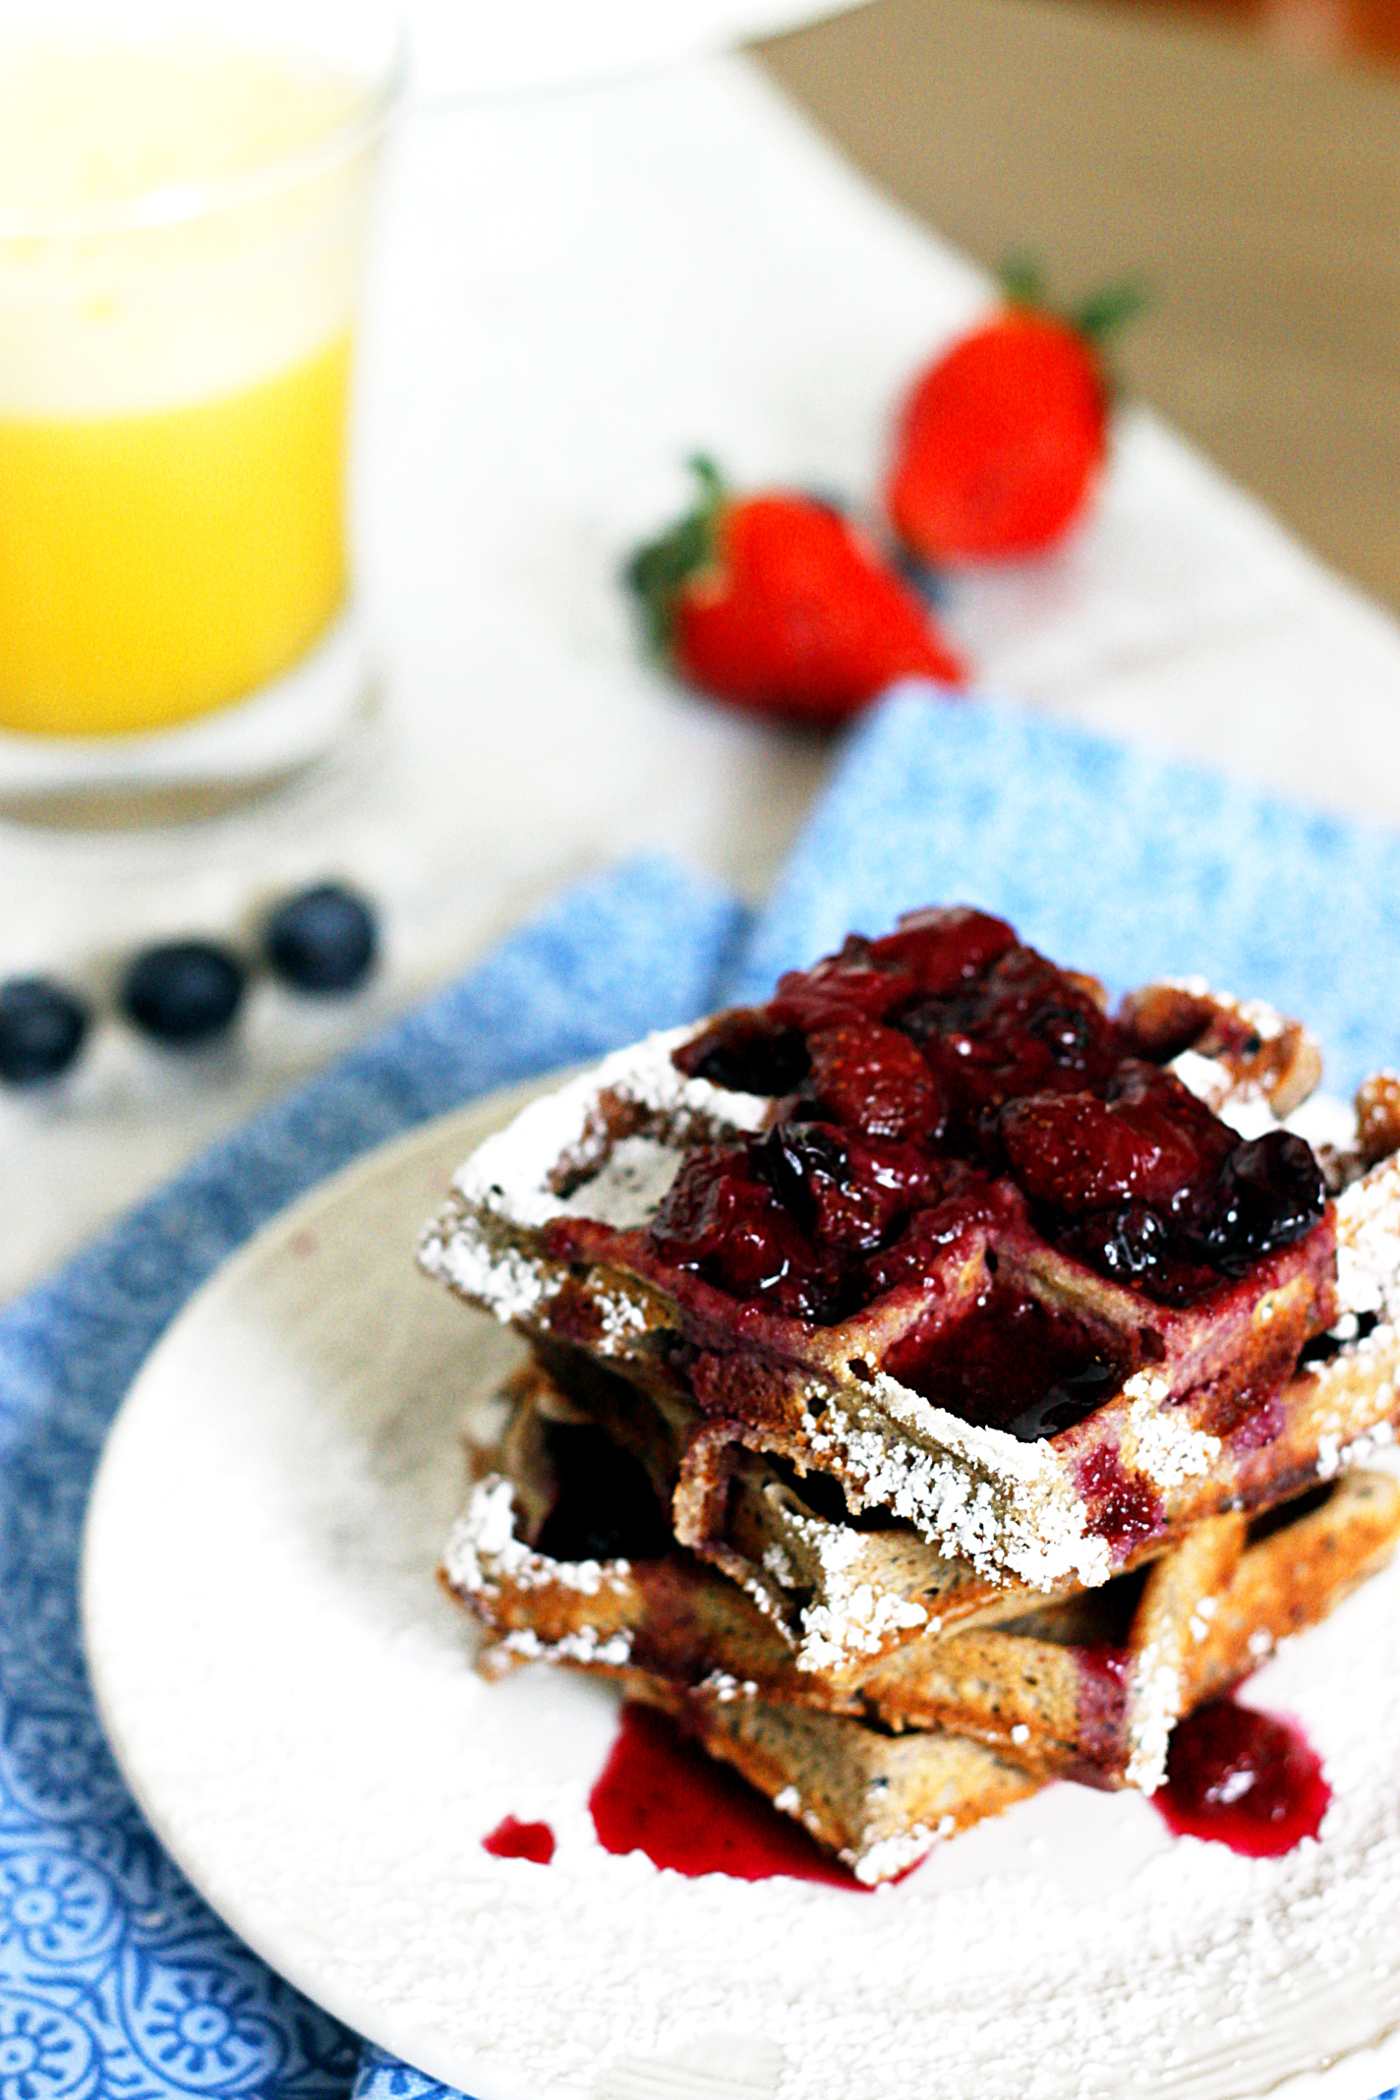 Whole Wheat Berry Waffles with Strawberry Blueberry Syrup